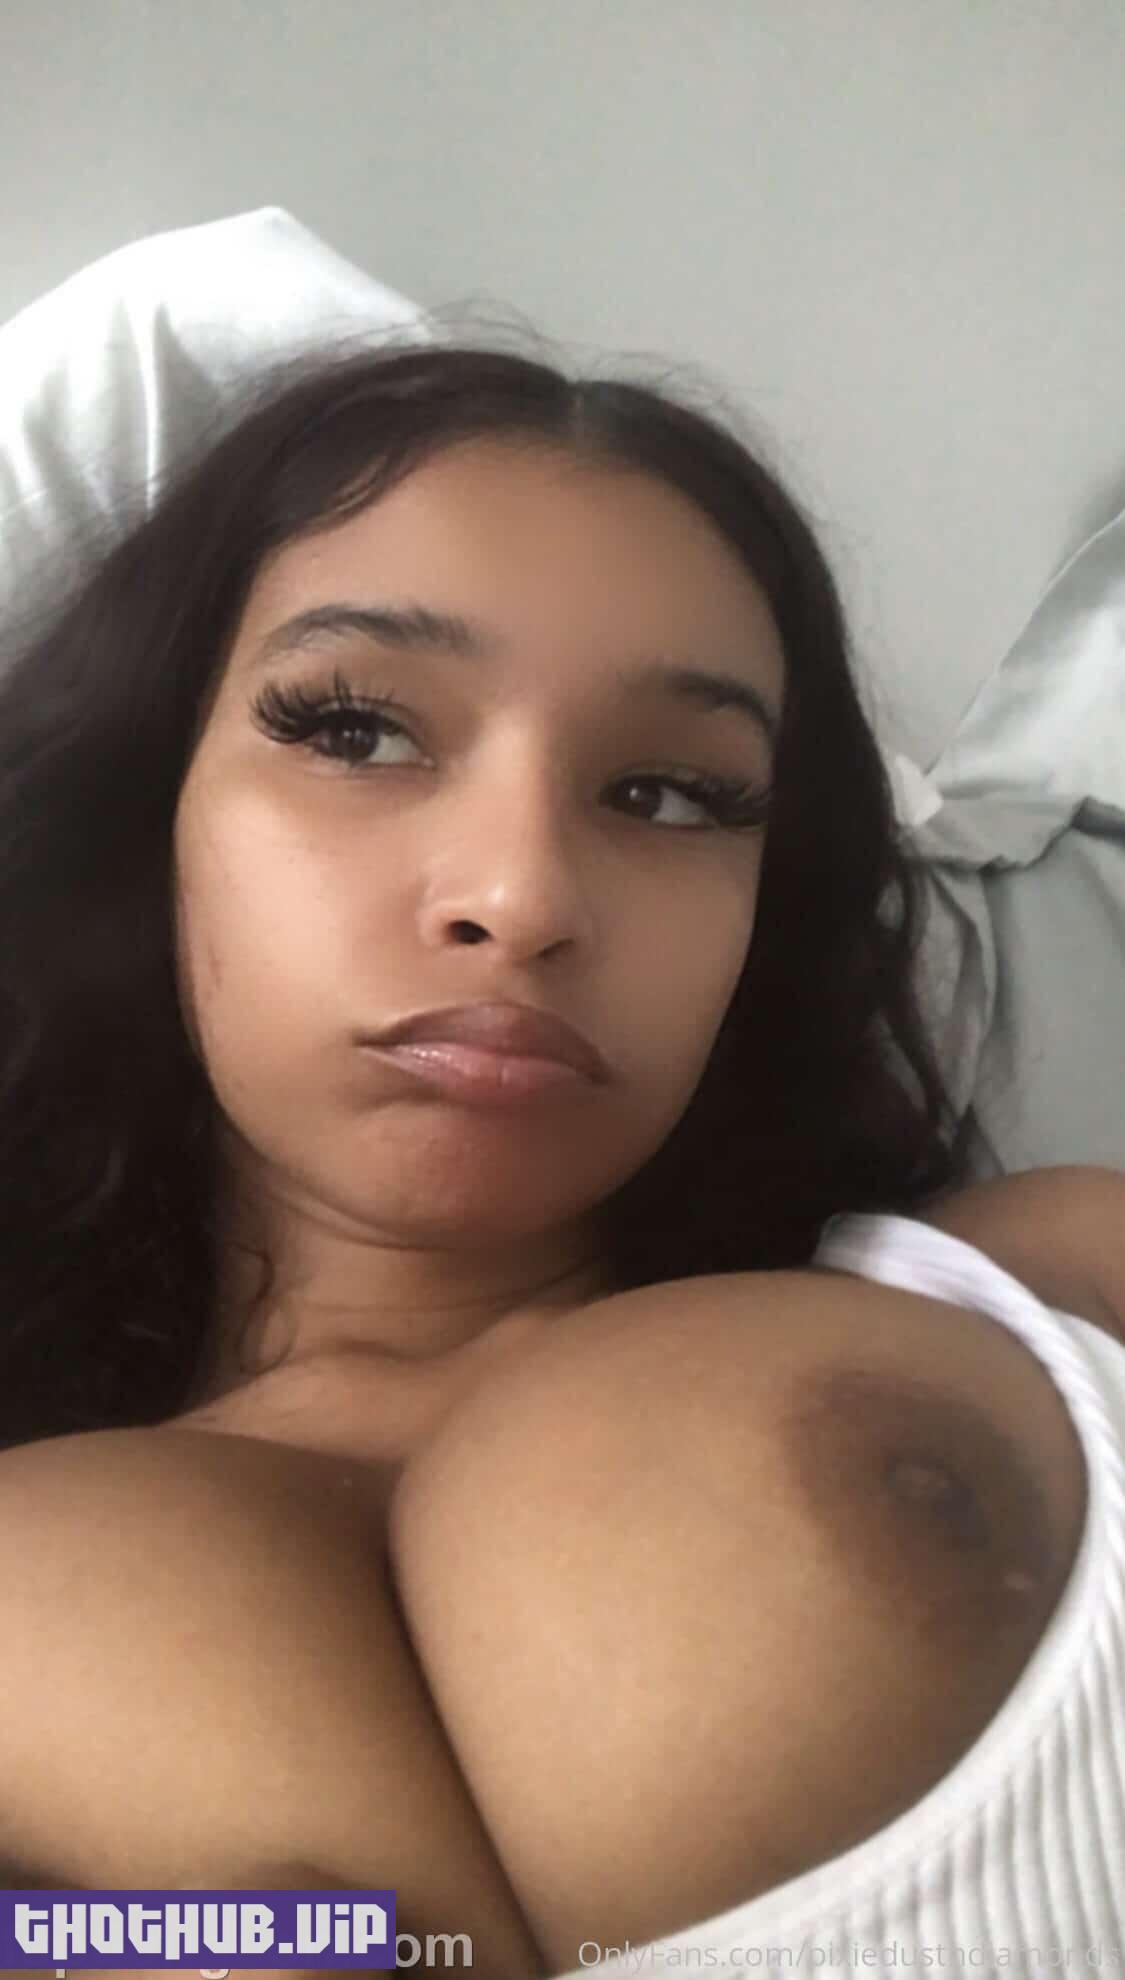 1660965633 483 Thumbalinaxxx %E2%80%93 Busty Black Baddie Onlyfans Nudes